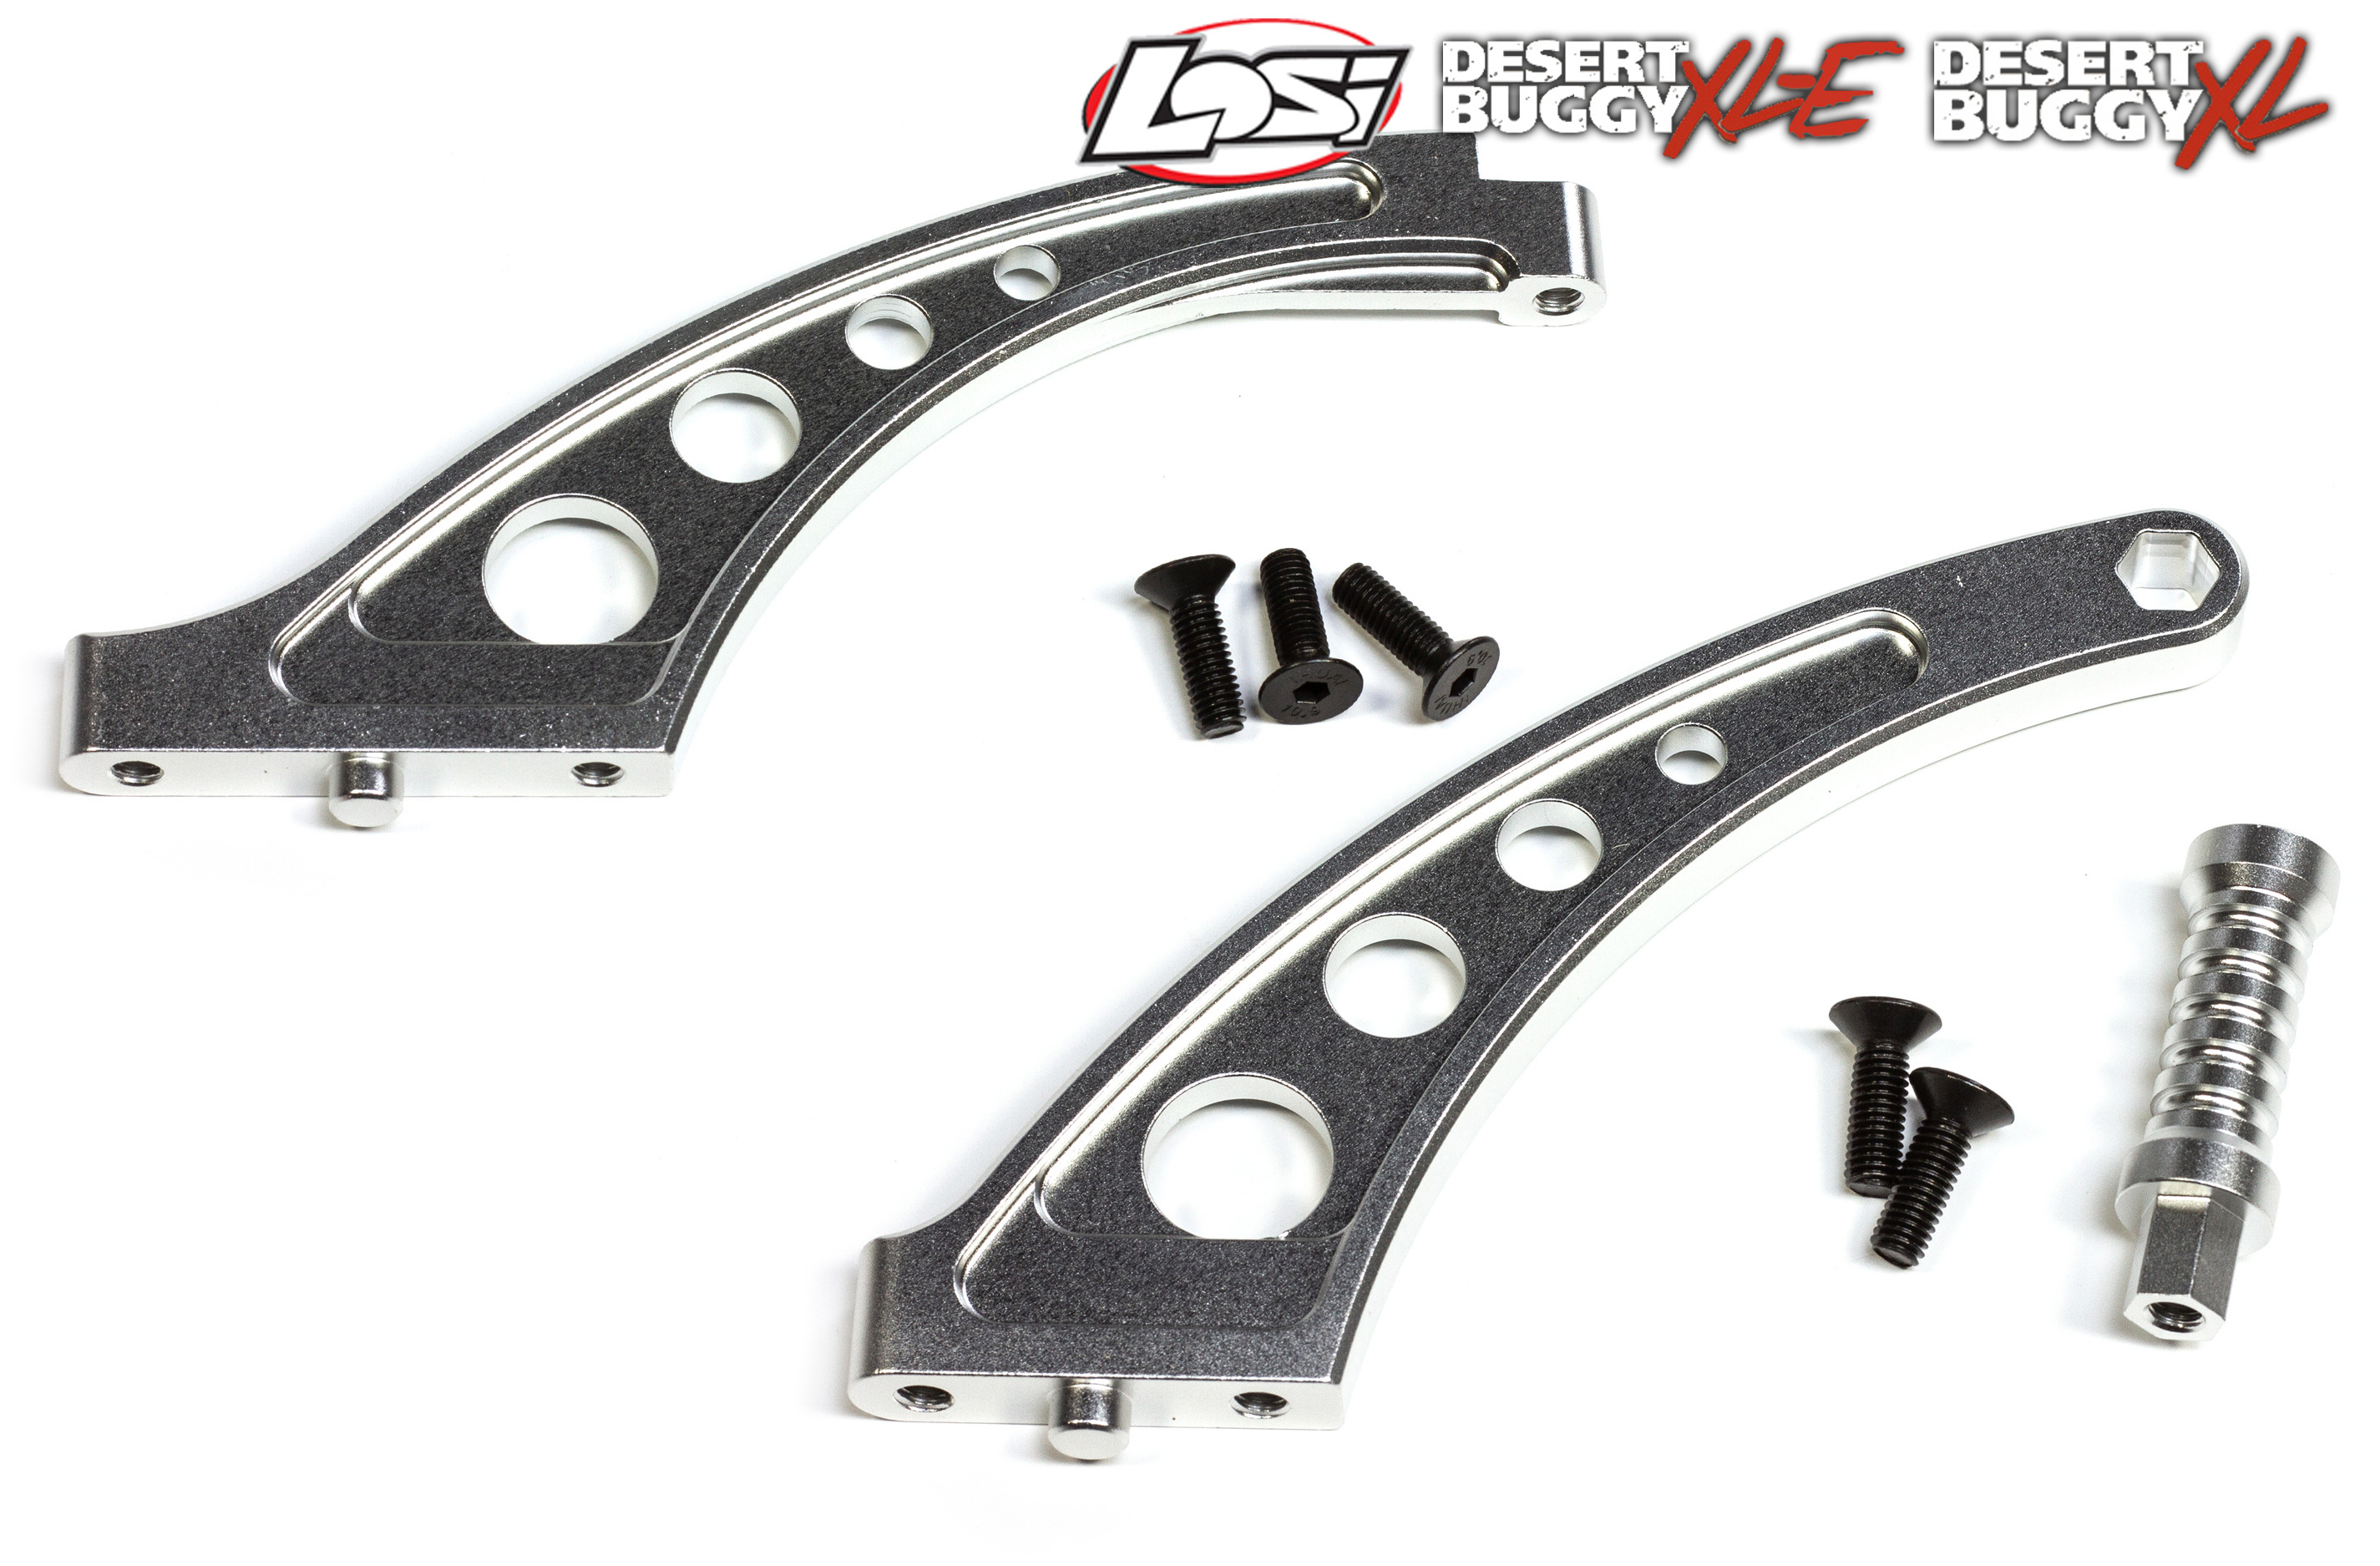 DBXL006/007 ATOP Front- and rear chassis brace, full set, for Losi DBXL/DBXL-E